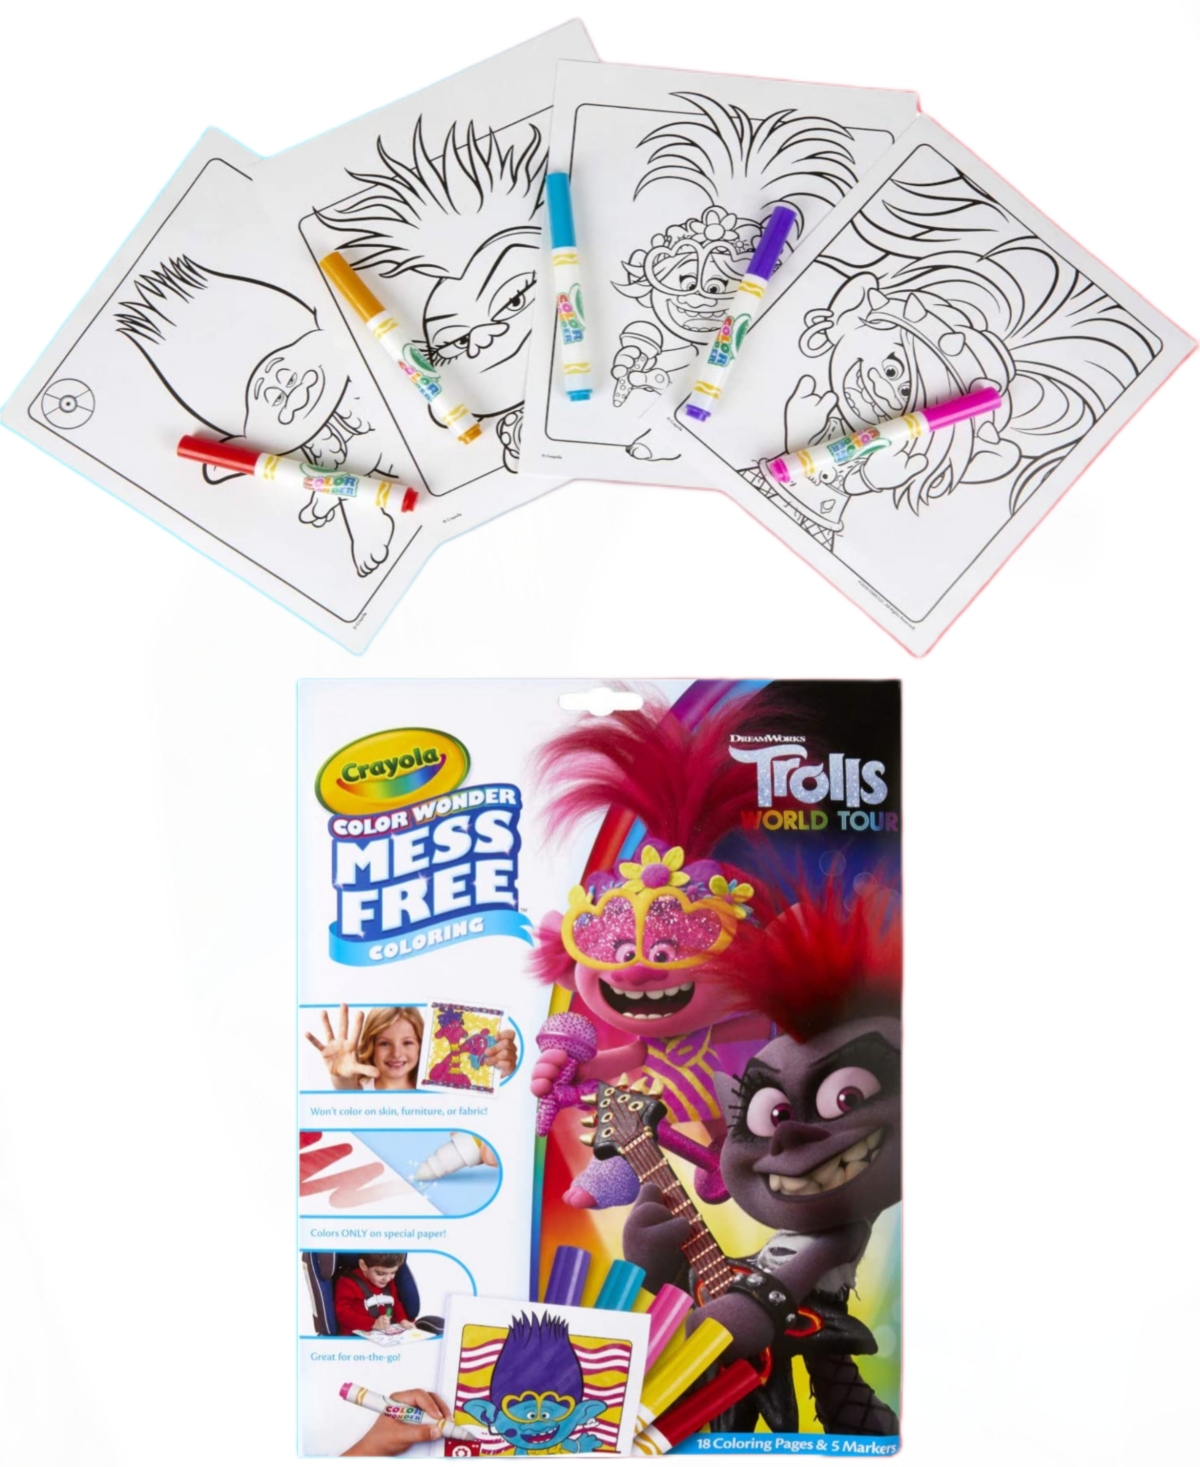 Crayola Color Wonder Trolls 2 World Tour Series 18 Mess Free Coloring Pages Set In Multi